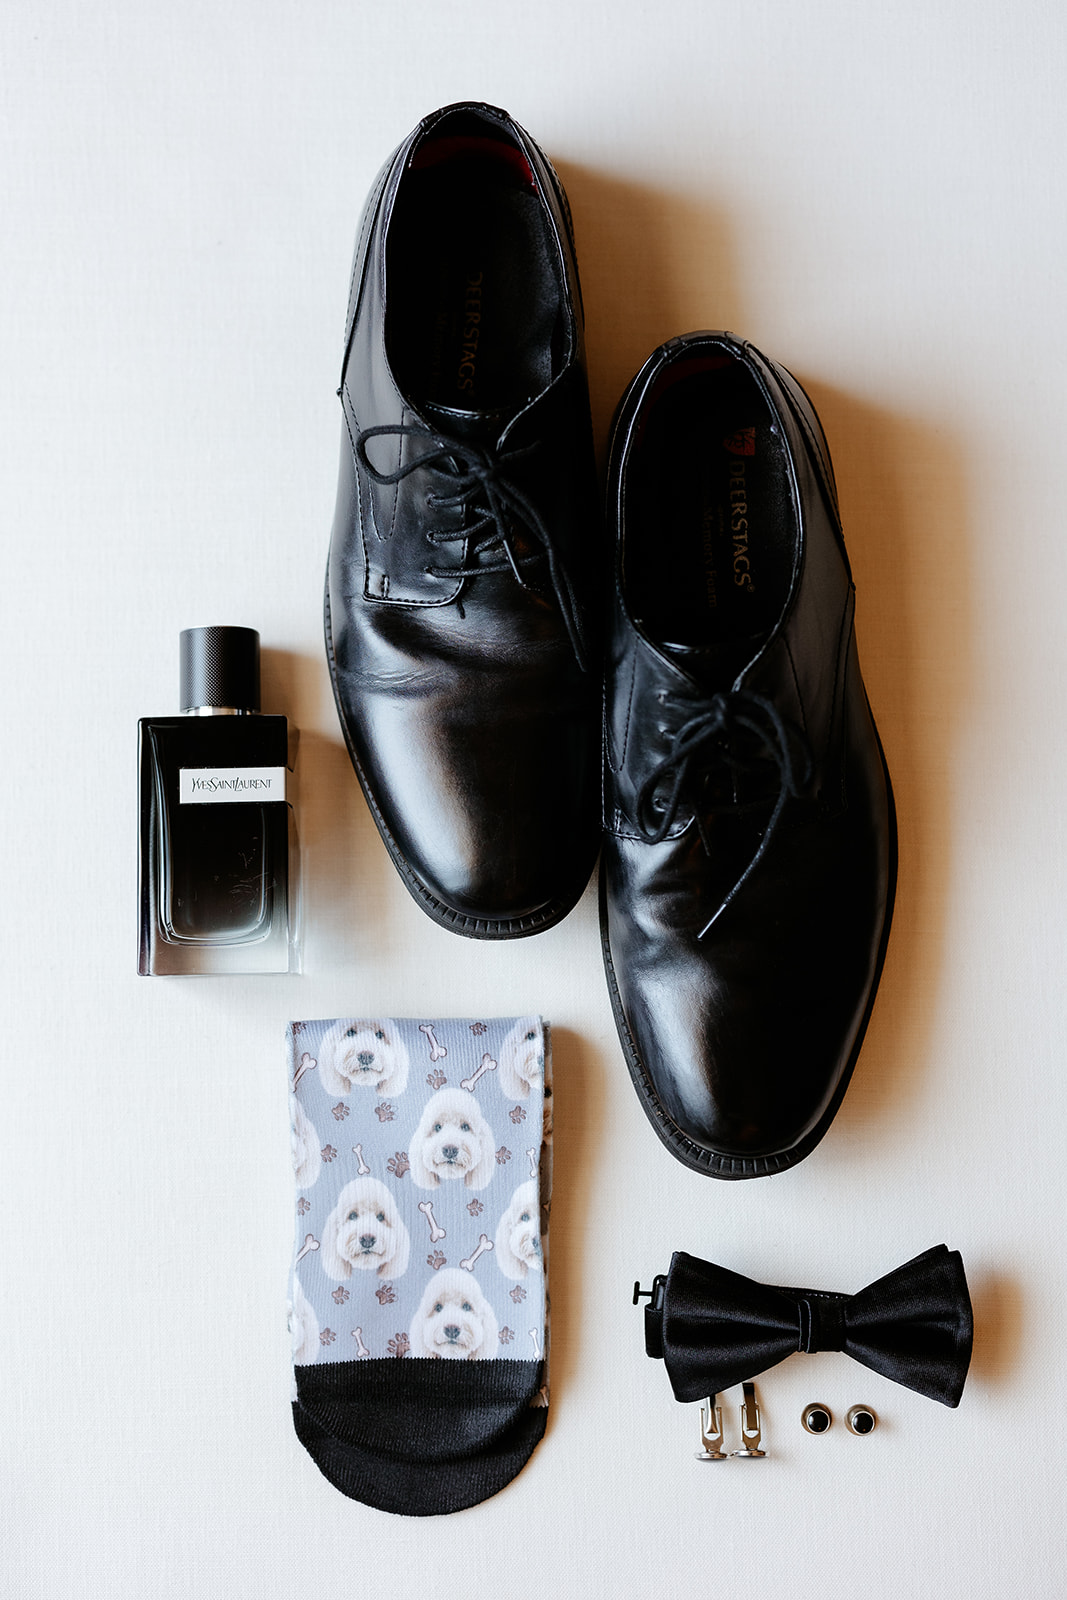 A pair of polished black dress shoes arranged neatly beside a bottle of cologne, patterned socks, and a bow tie with cufflinks set on a light background.